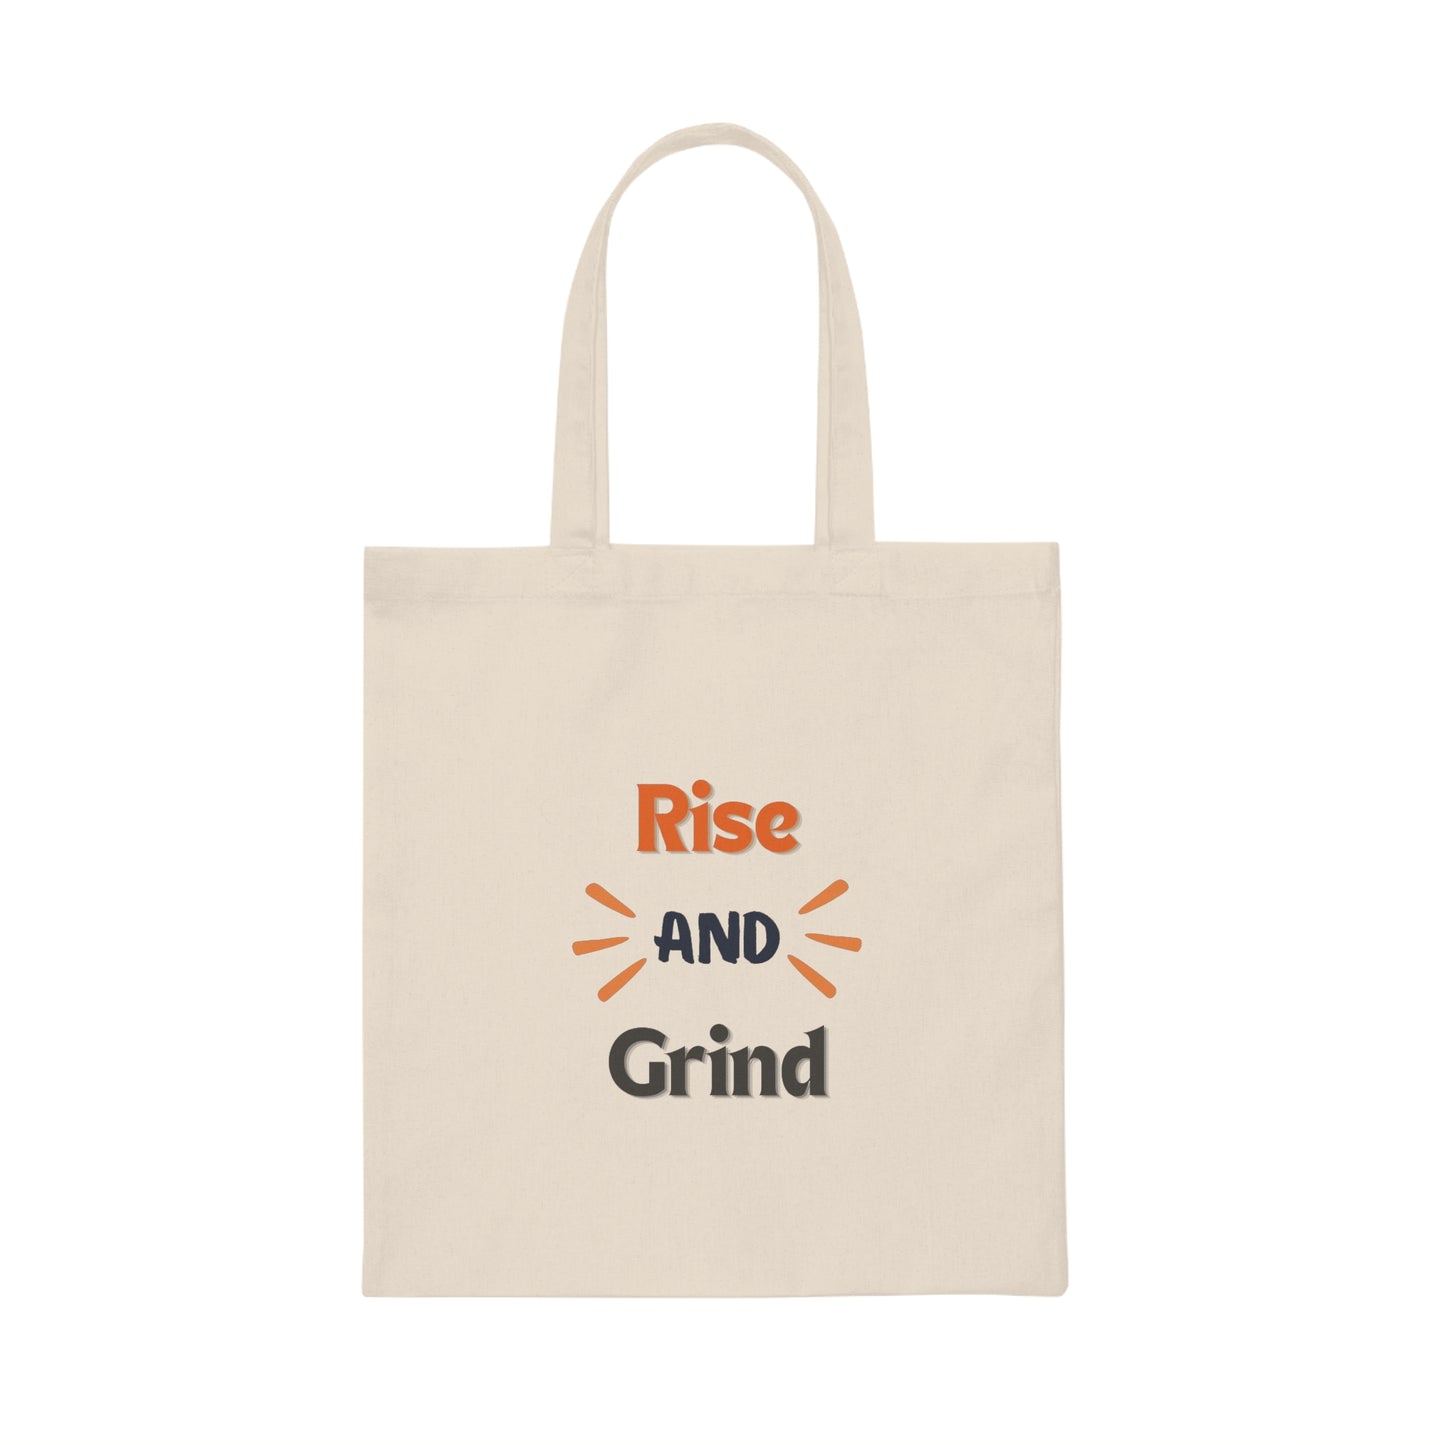 Rise and Grind Cotton Canvas Tote Bag